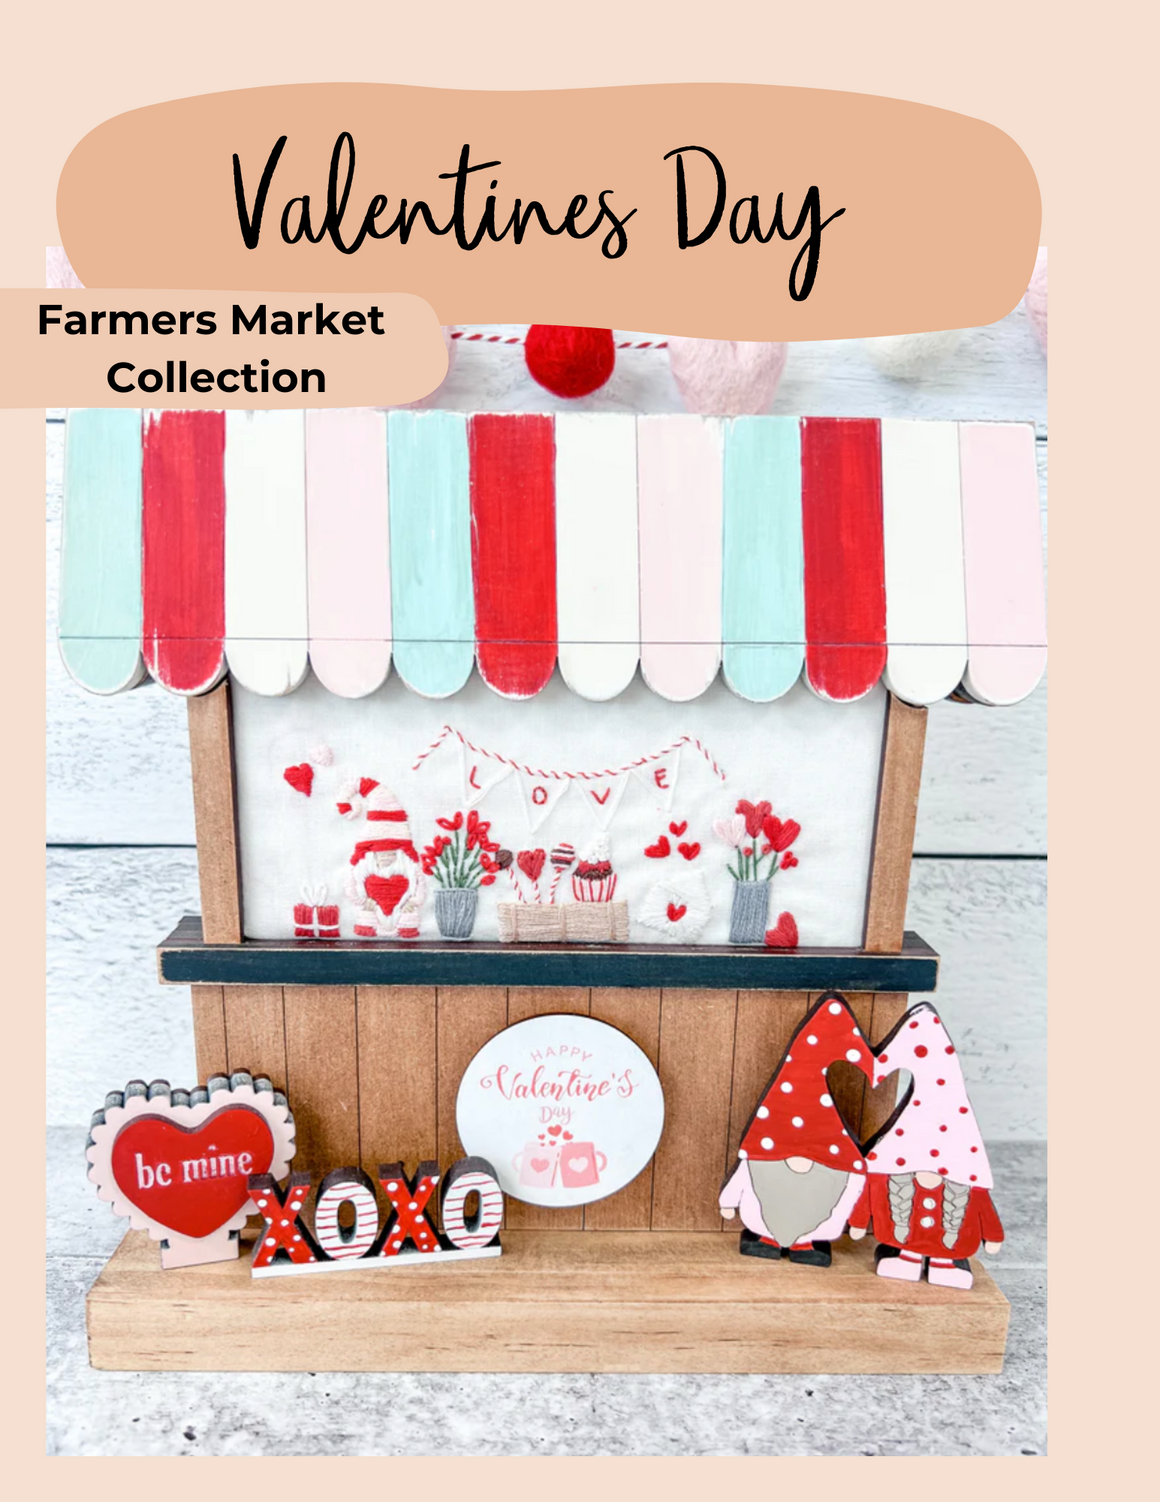 Seasonal Stamped Fabric | Valentines Day | Farm Market Collection